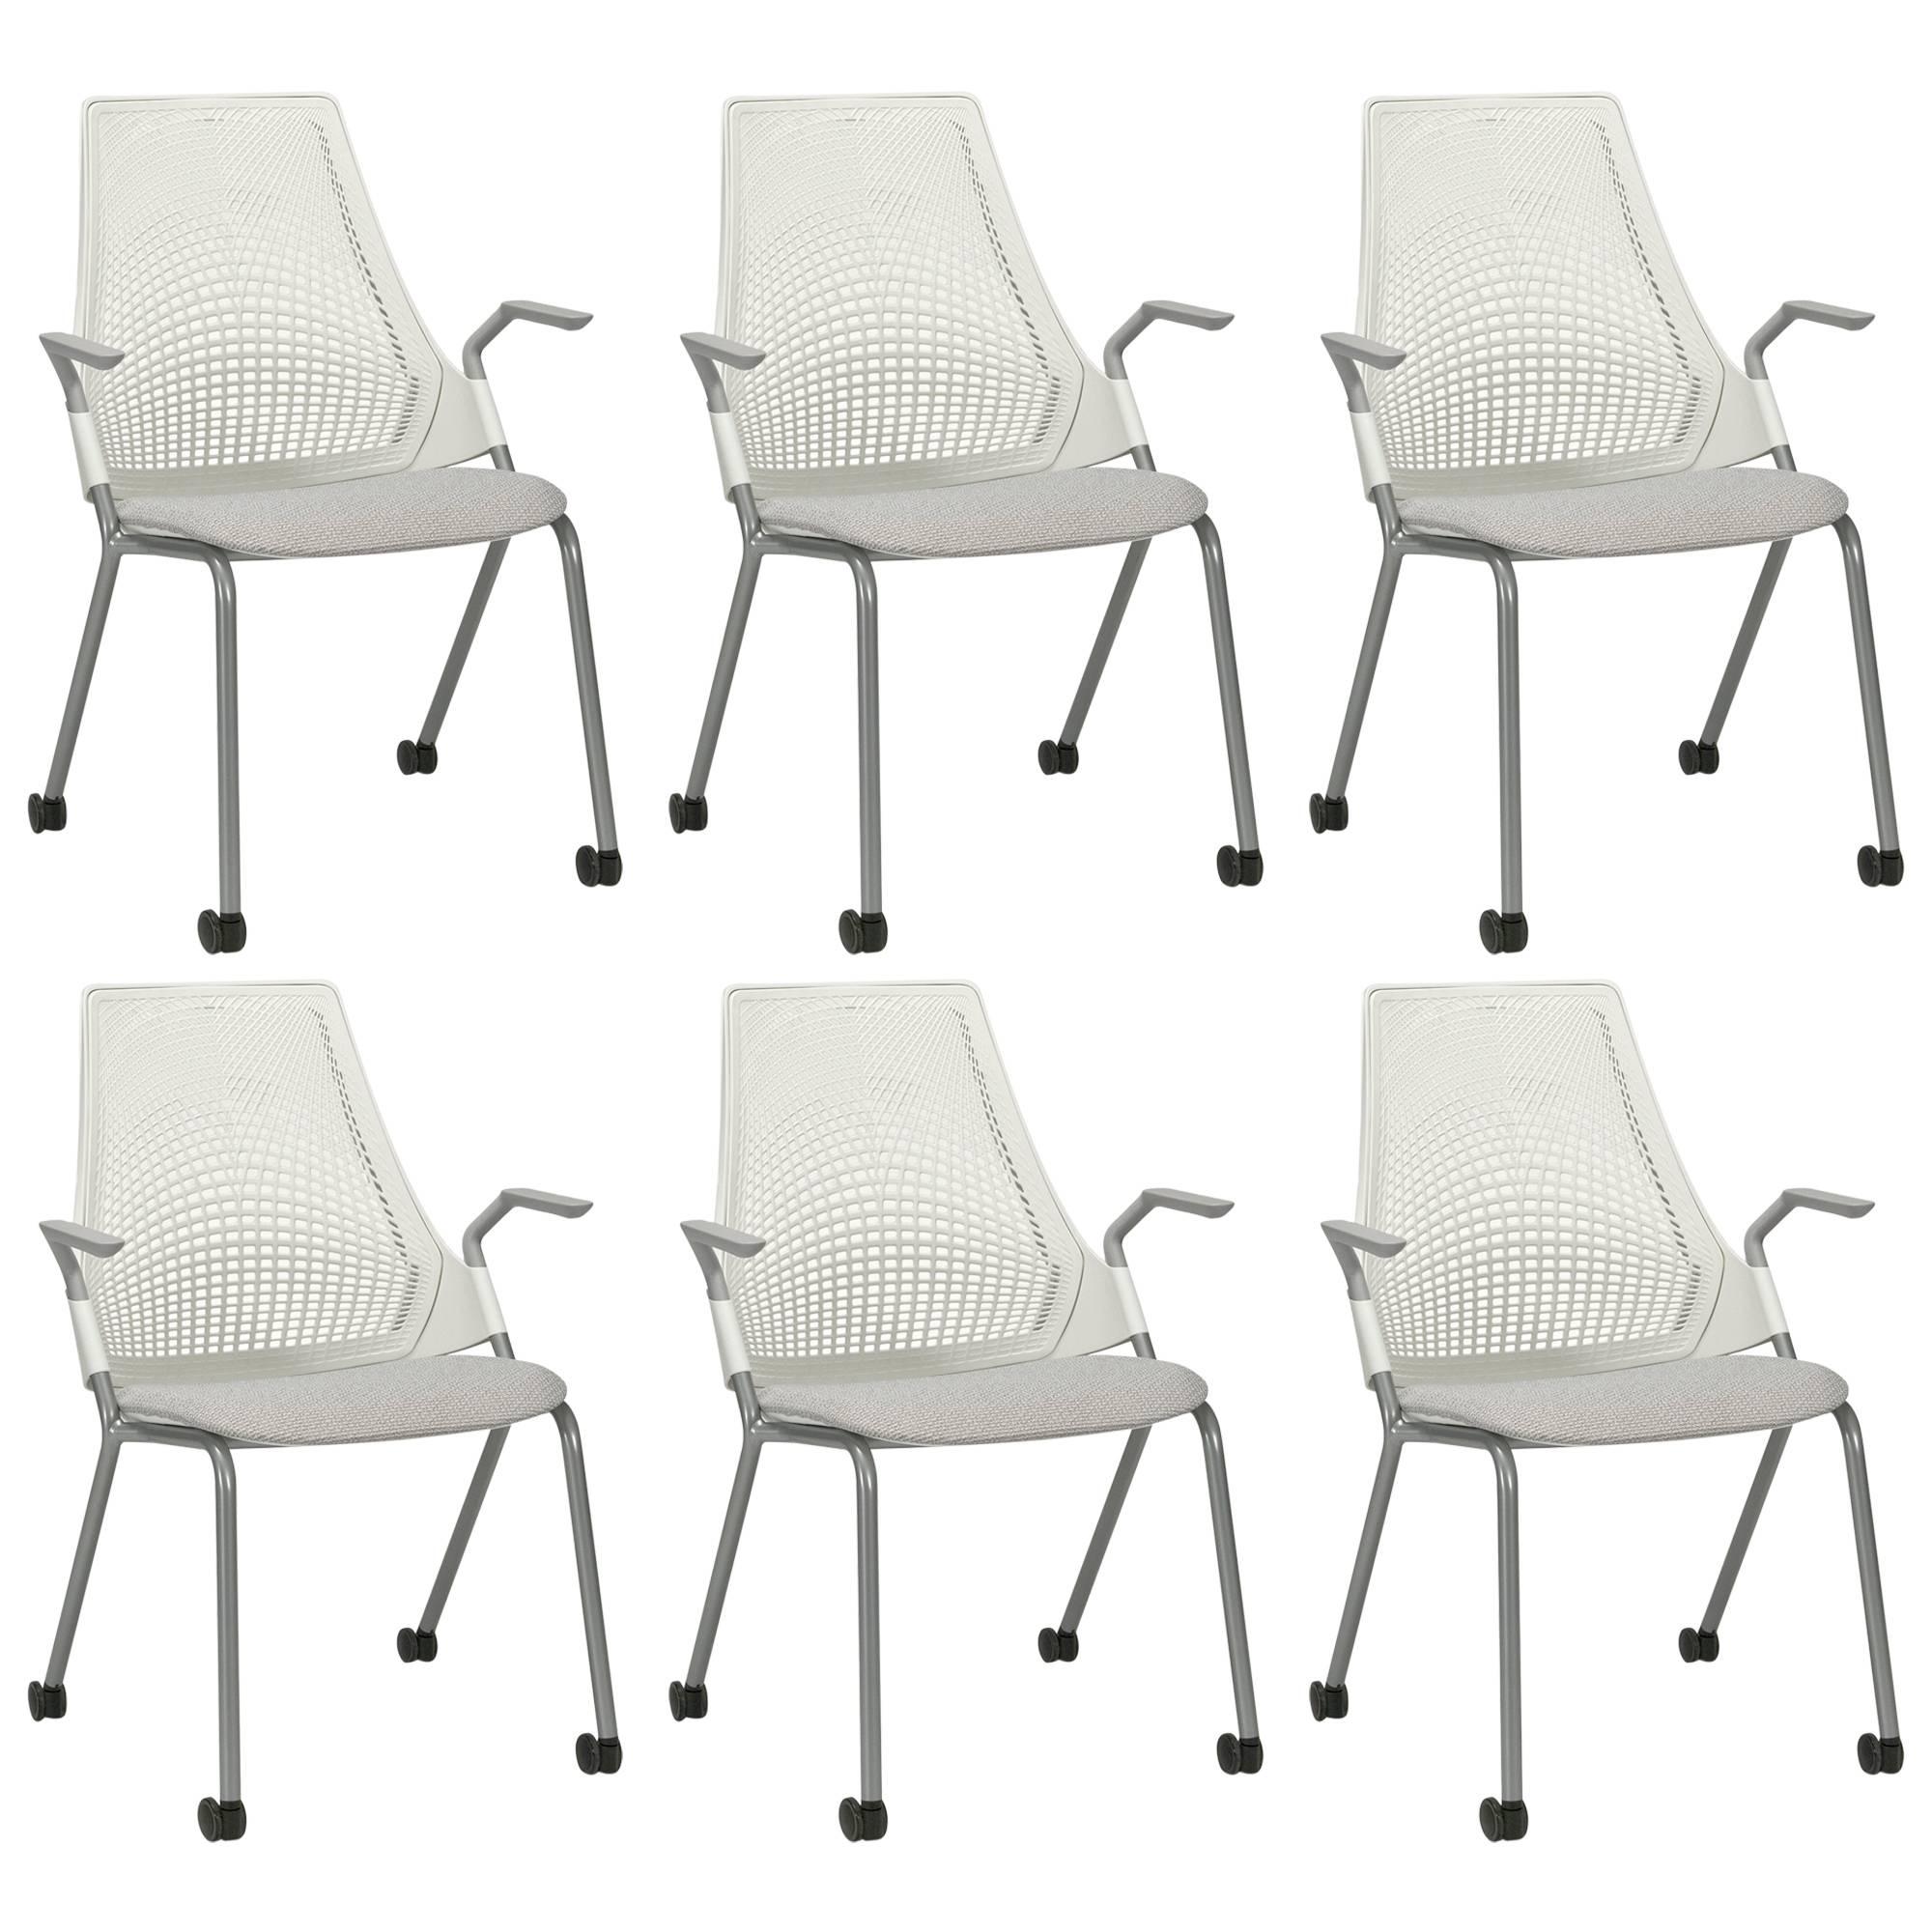 Sayl Task Chairs on Casters by Yves Béhar for Herman Miller